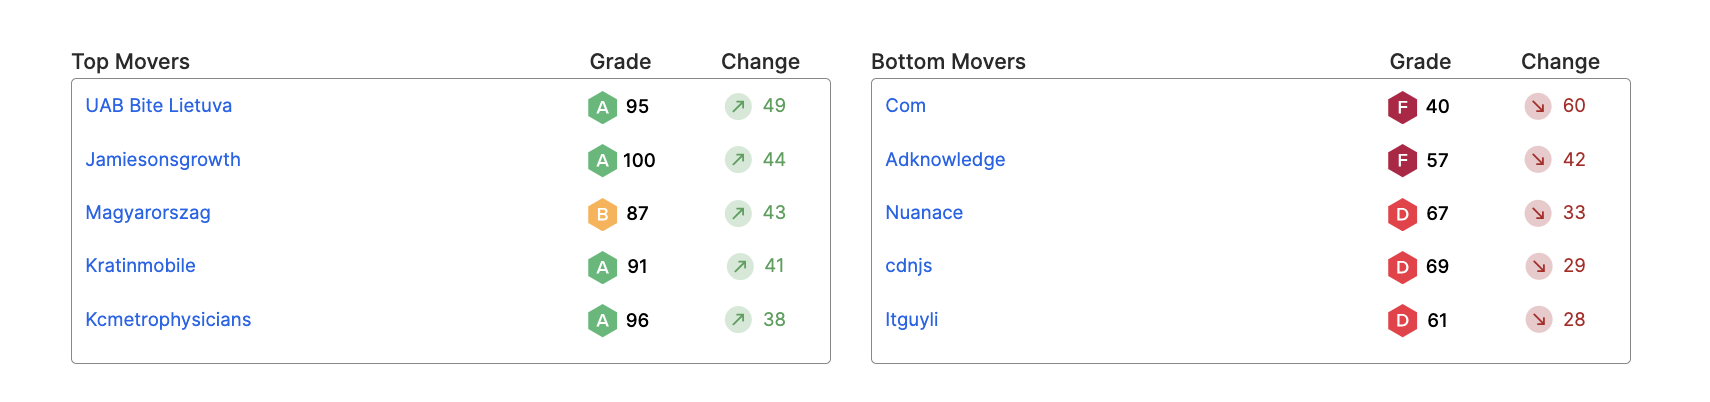 portfolio-trends-top-movers.png